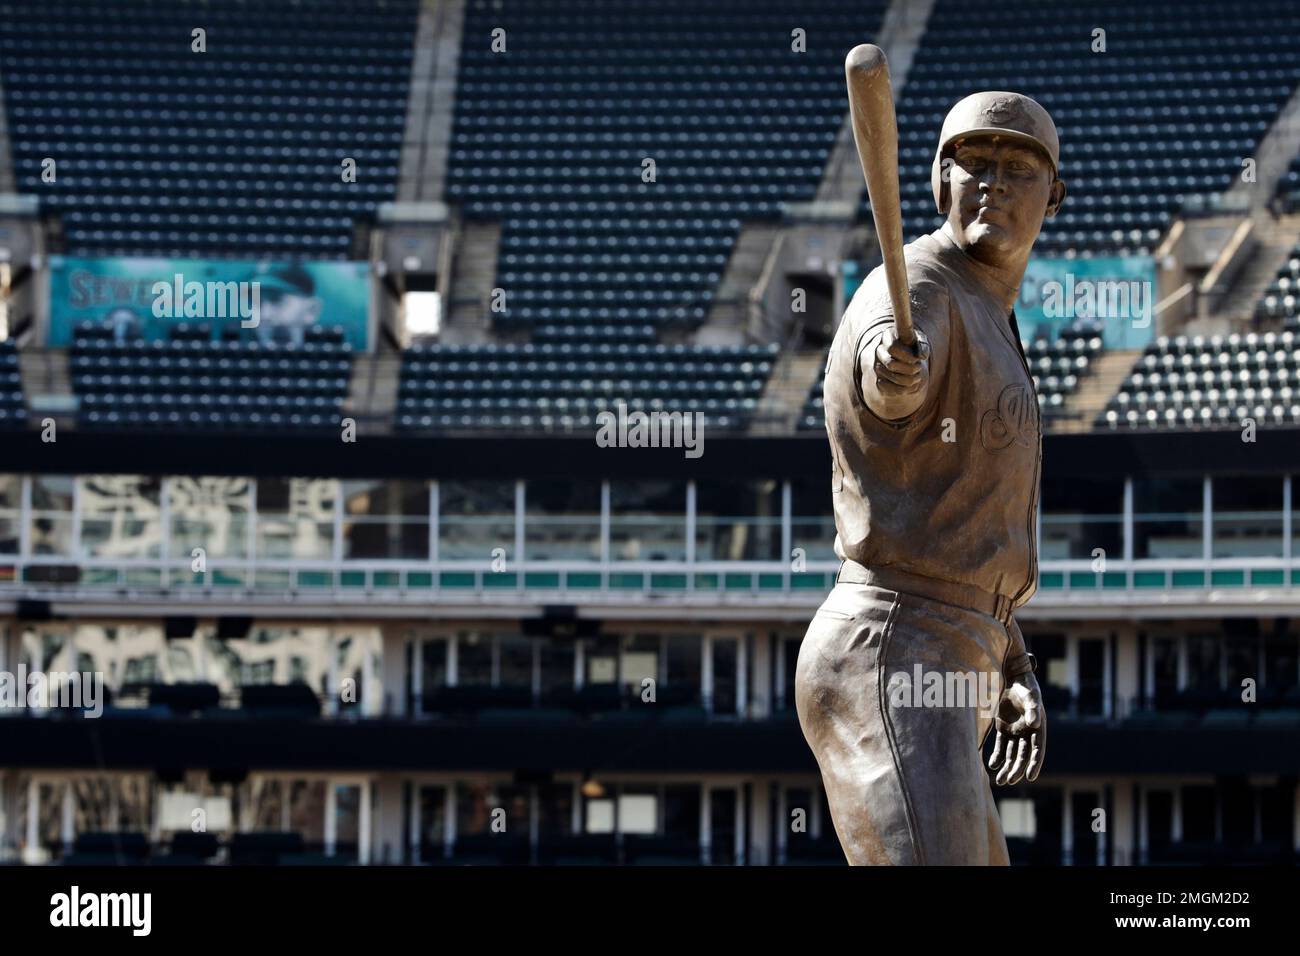 A statue of former Cleveland Indians Jim Thome stands in an empty